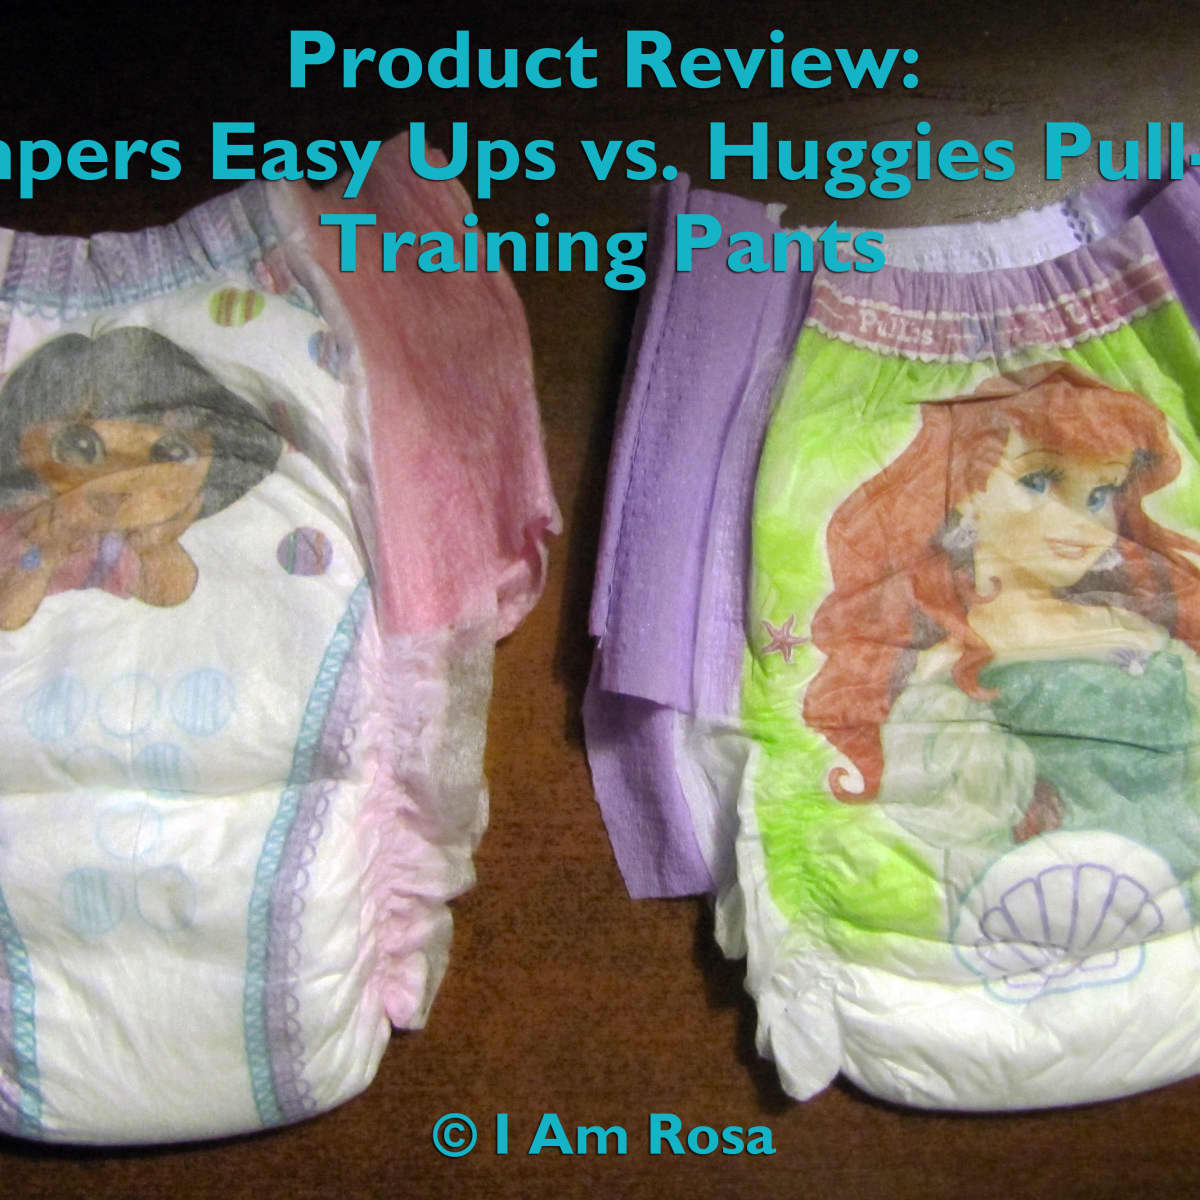 Product Review: Huggies Pull-Ups vs. Pampers Easy Ups Training Pants -  HubPages